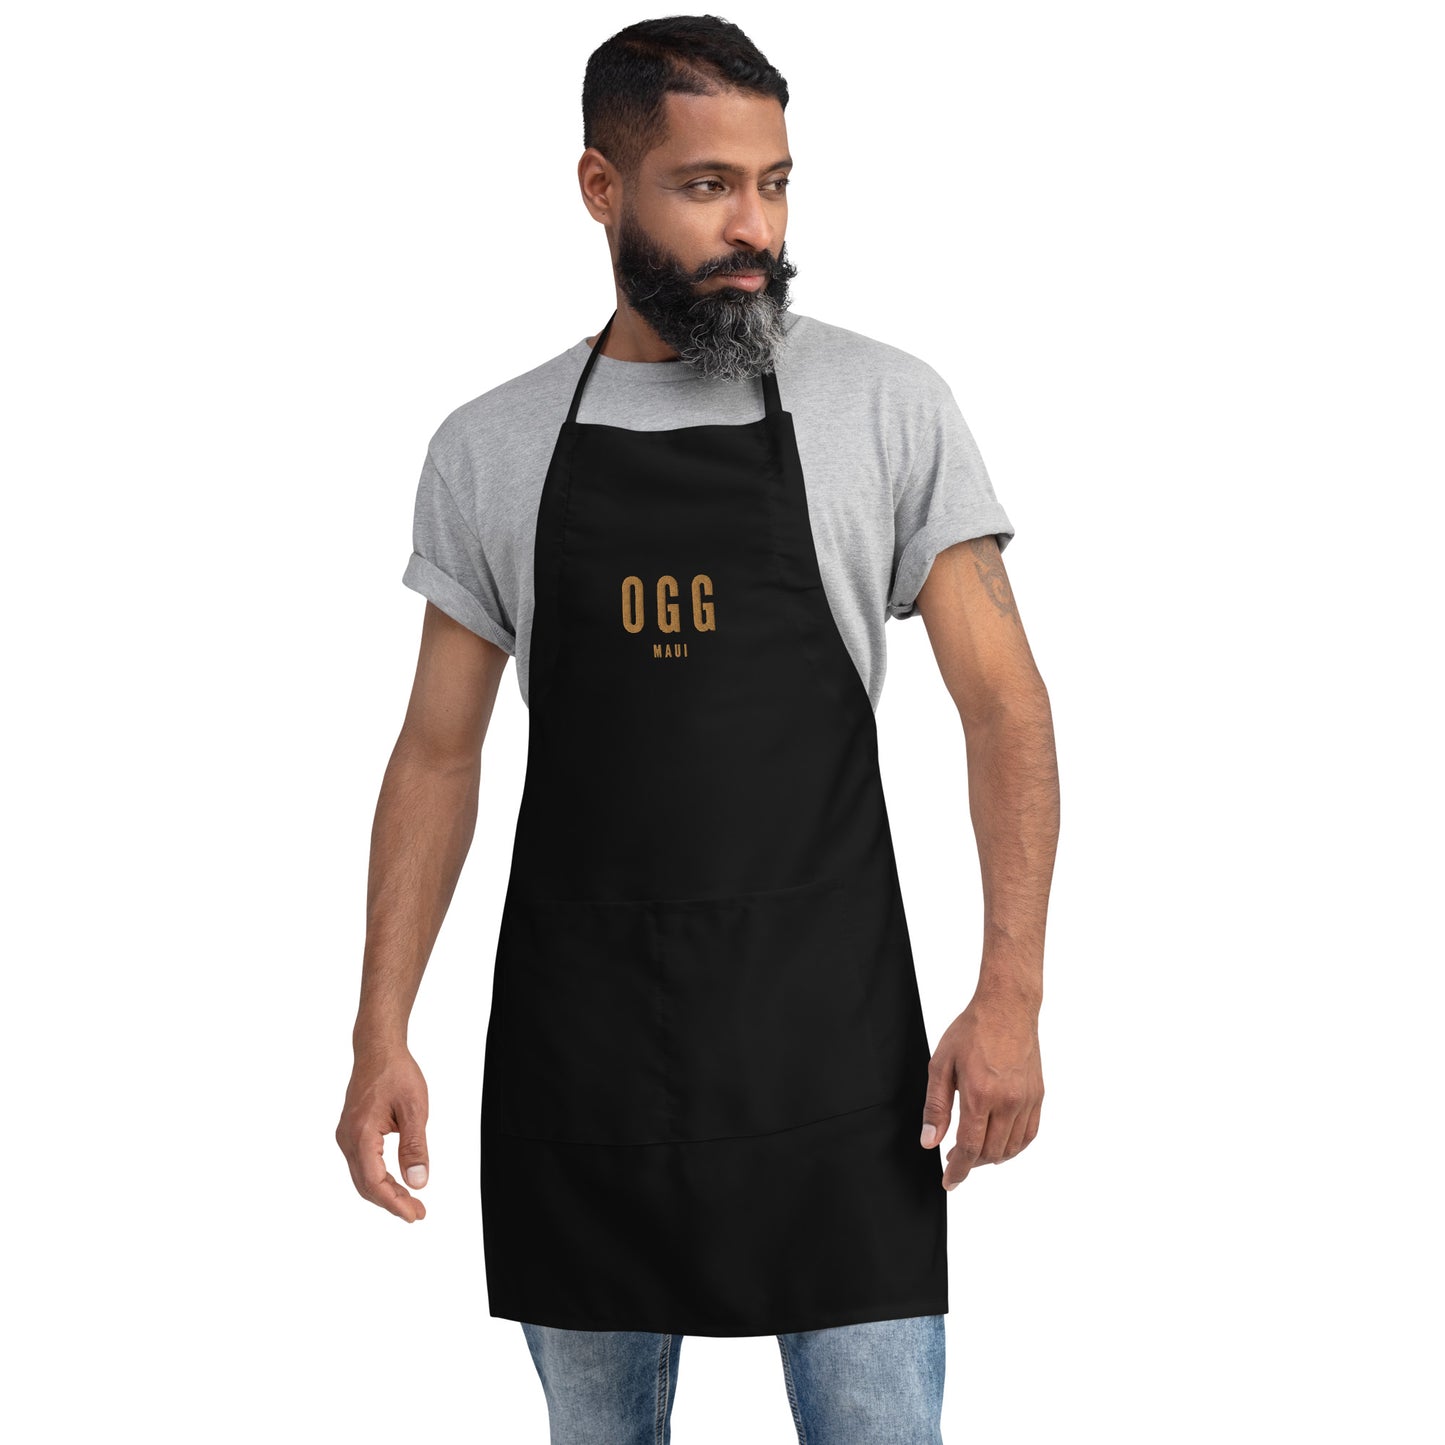 City Embroidered Apron - Old Gold • OGG Maui • YHM Designs - Image 05